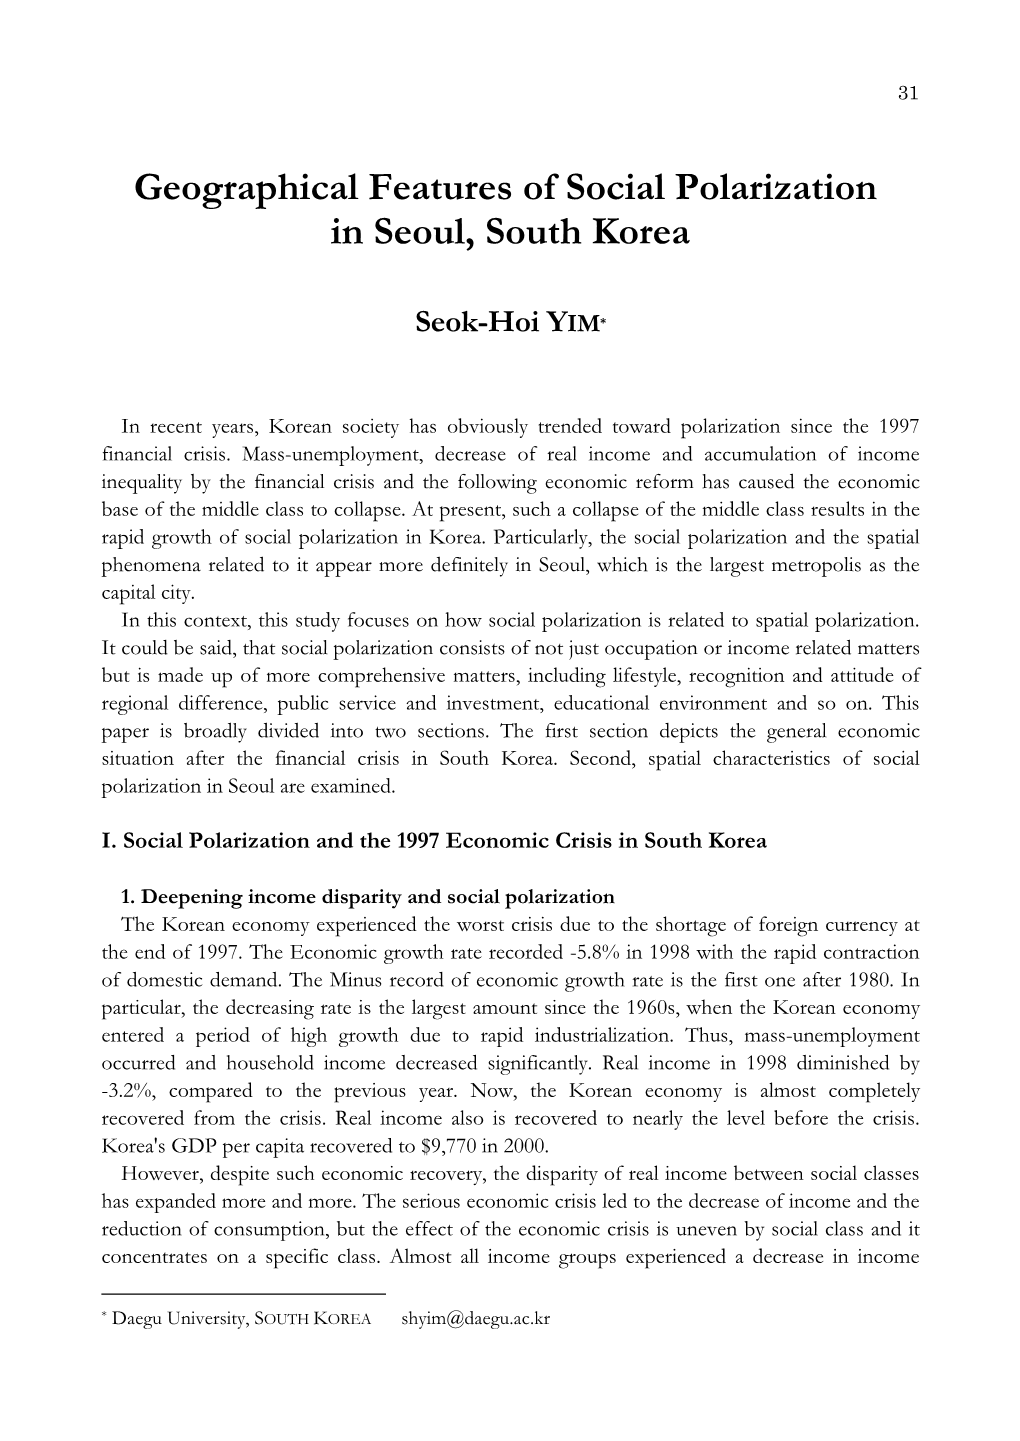 Geographical Features of Social Polarization in Seoul, South Korea